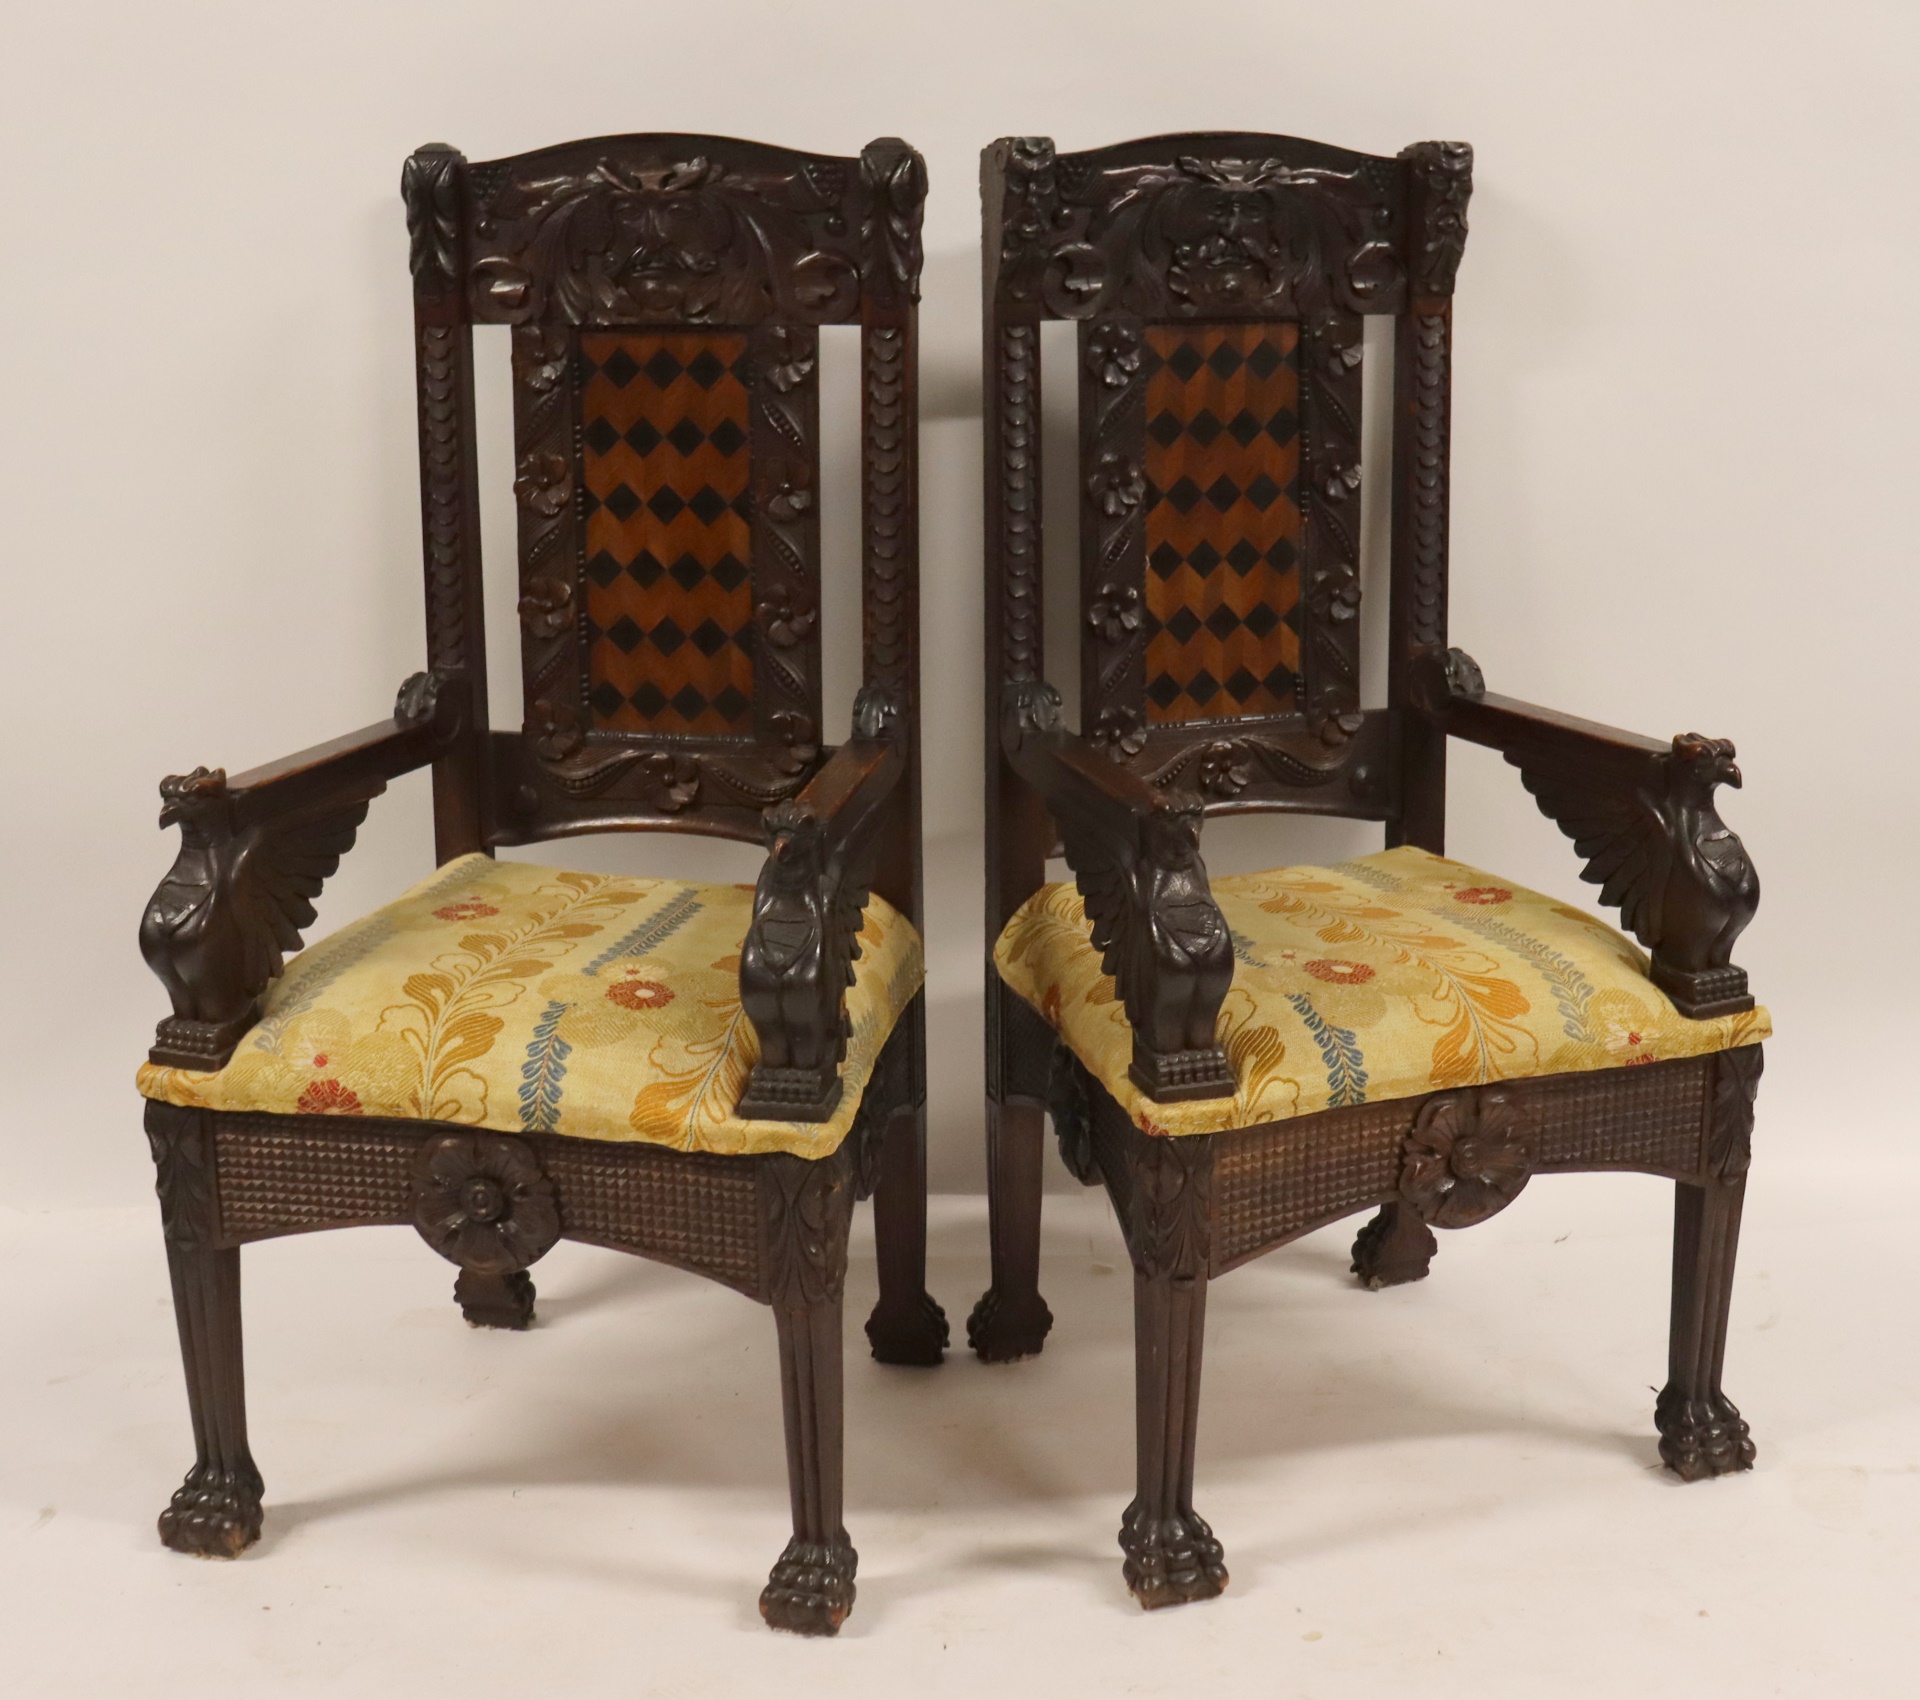 AN ANTIQUE PAIR OF FINELY CARVED